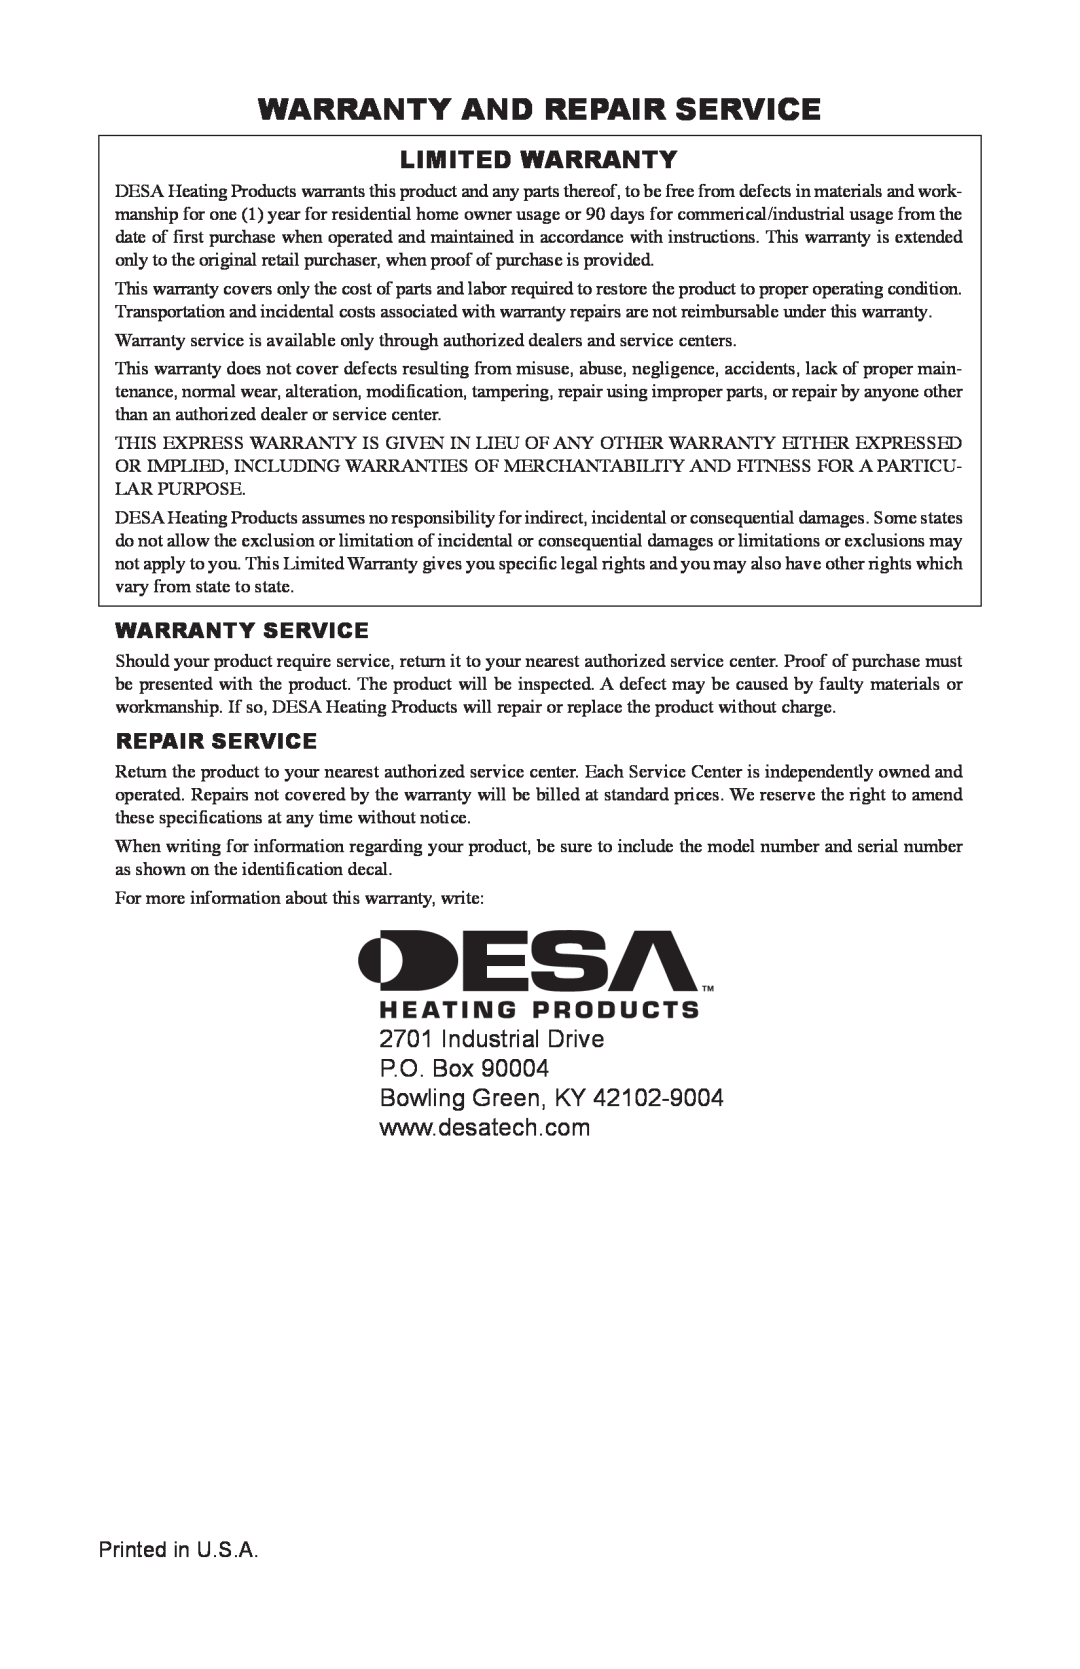 Desa PD15EA owner manual Warranty And Repair Service, Limited Warranty, Industrial Drive P.O. Box 